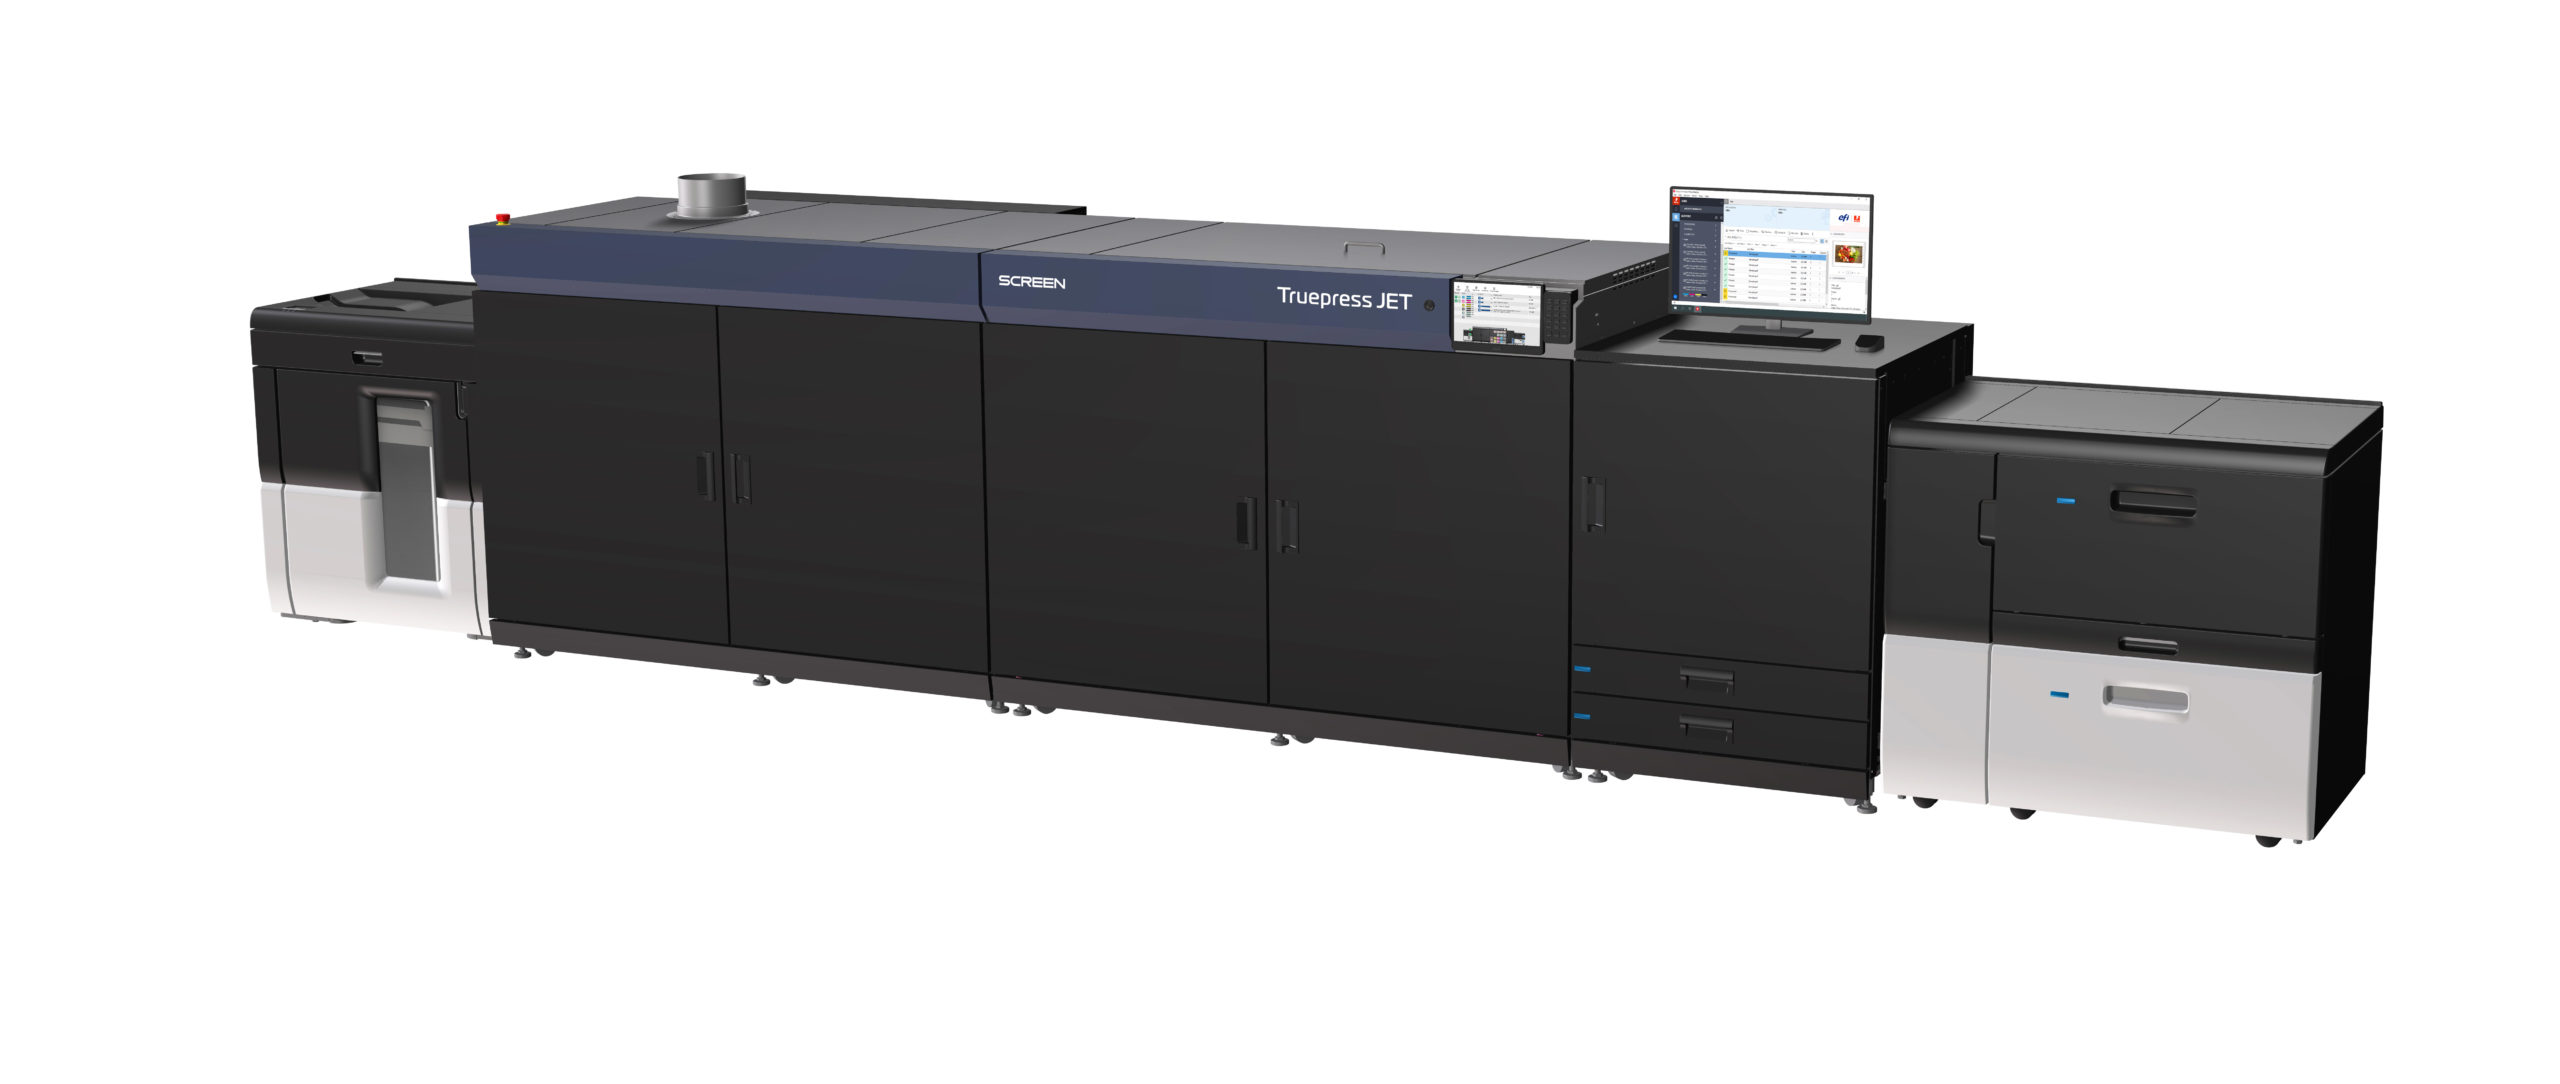 Image from Screen Graphic Solutions moves into A3 sheetfed inkjet in co-operation with Kyocera